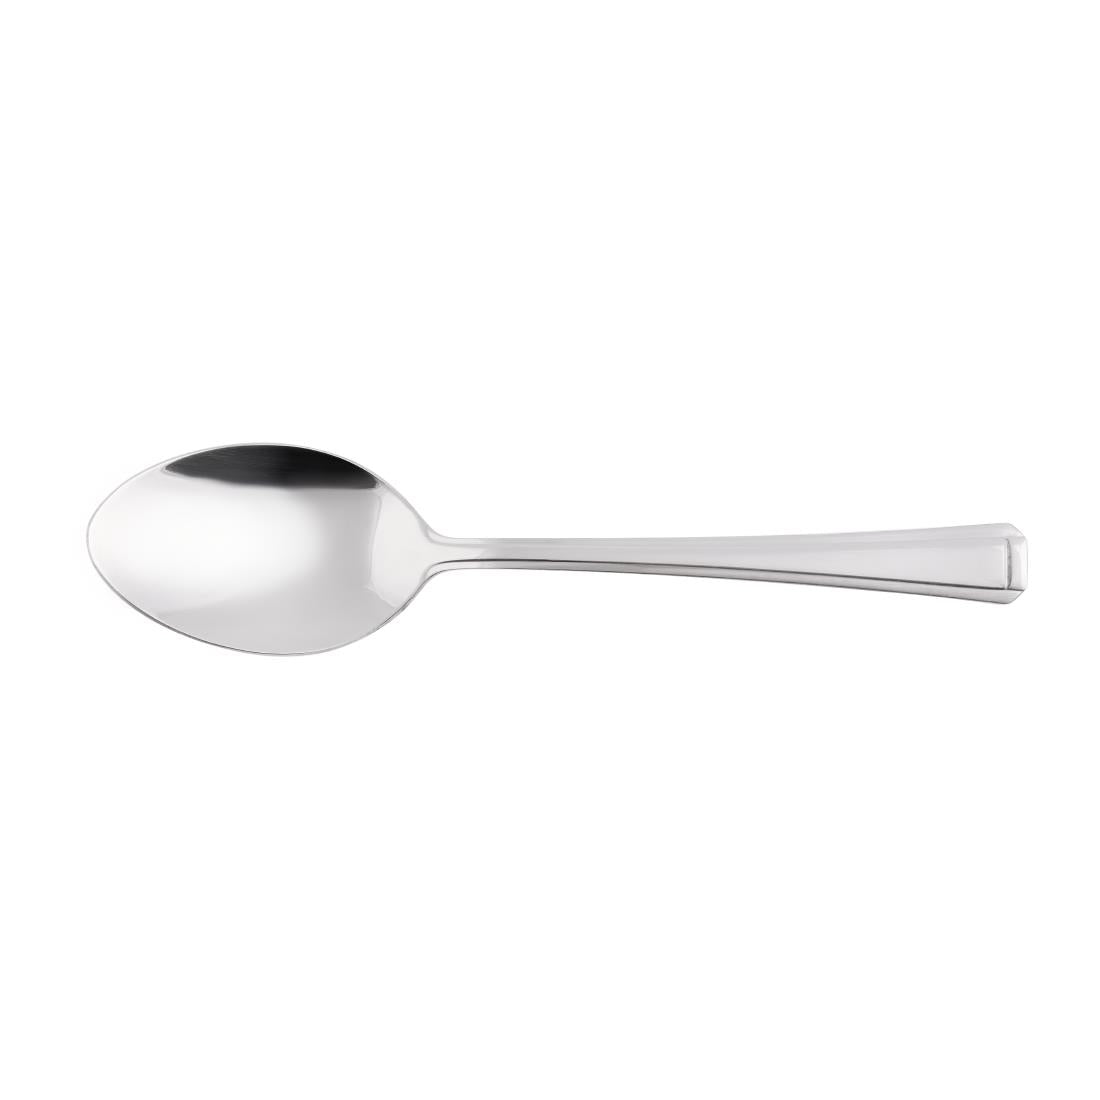 D692 Olympia Harley Service Spoon (Pack of 12) JD Catering Equipment Solutions Ltd